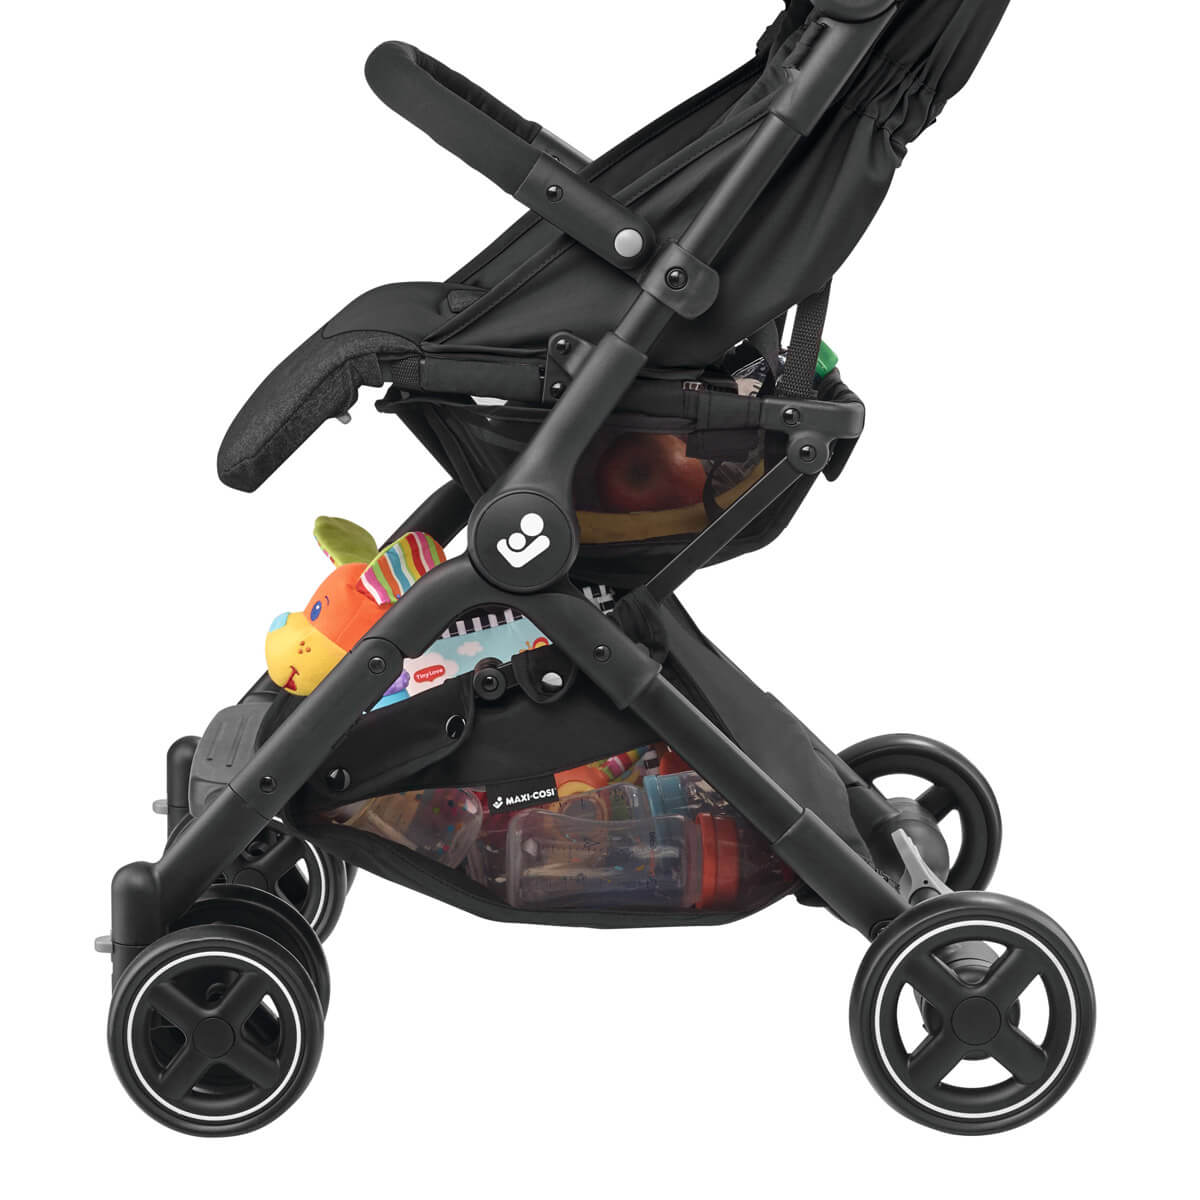 Lara stroller provides maximum storage and easy access to parents' belongings with two shopping baskets